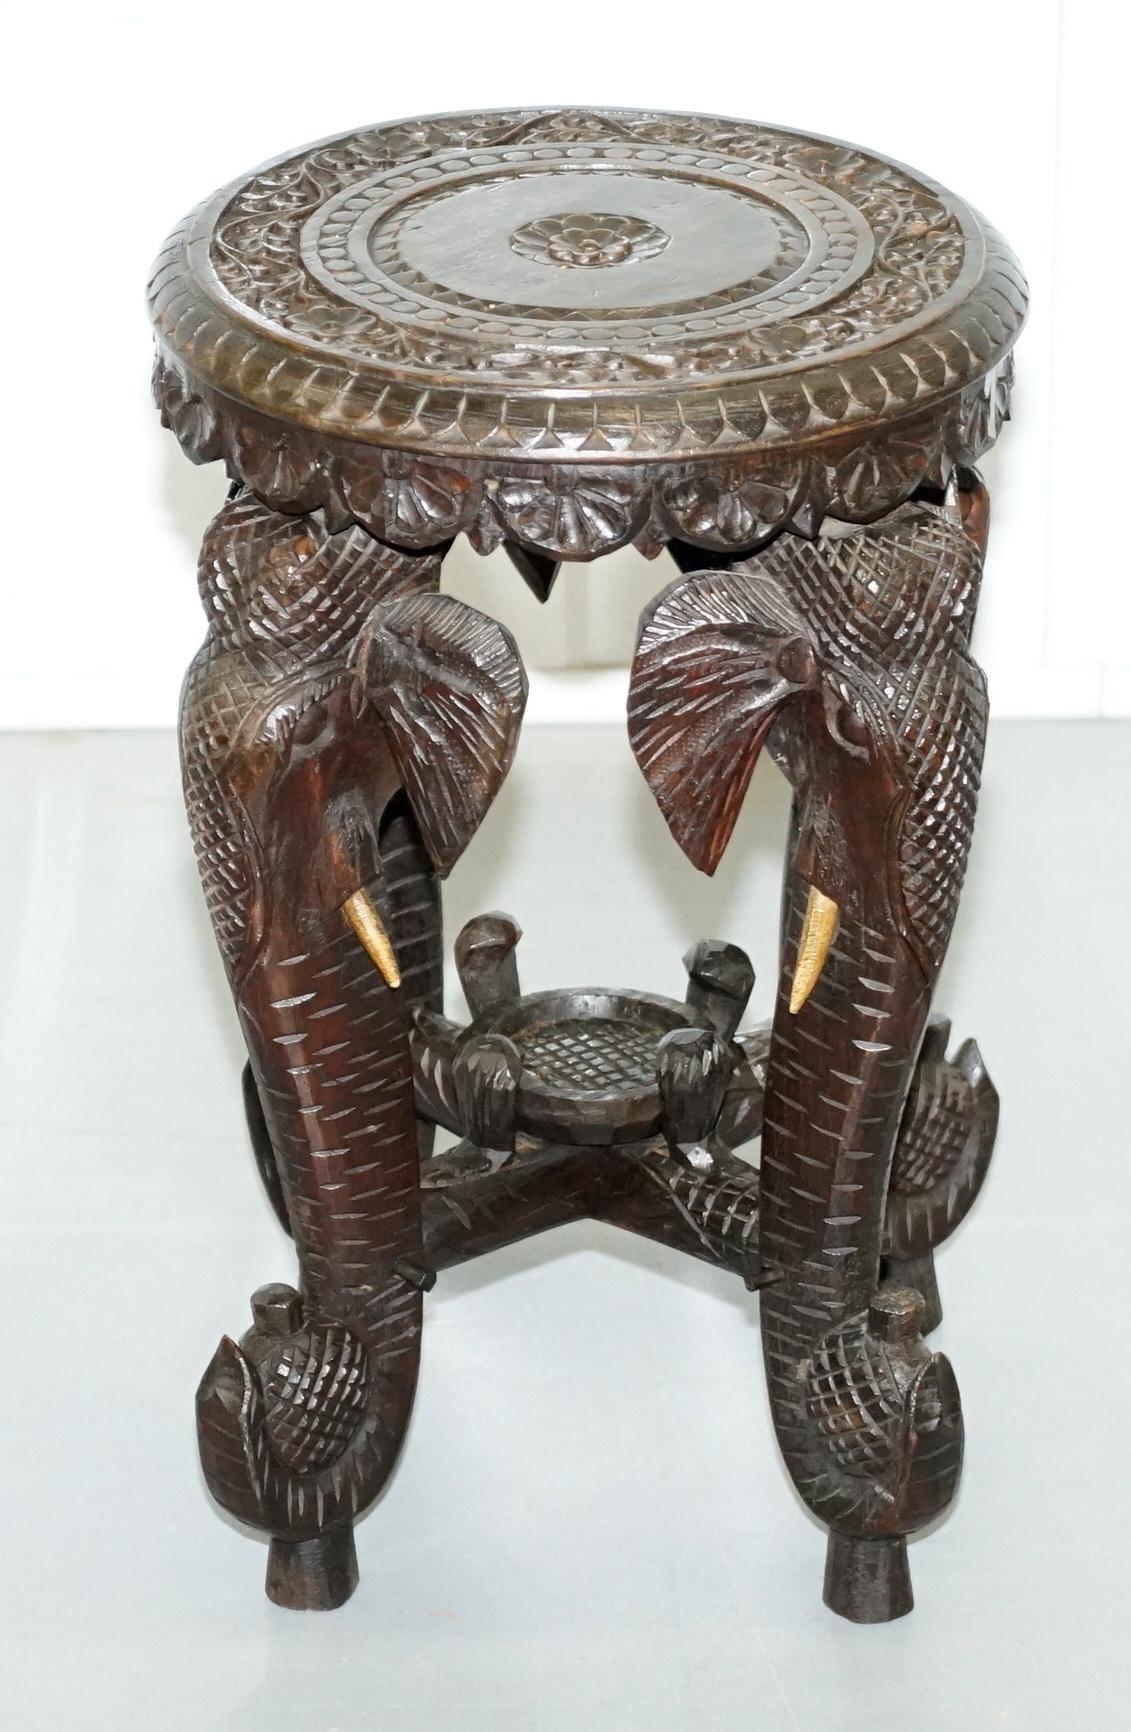 We are delighted to offer for sale this highly collectable and very rare Anglo Indian hand carved rosewood side table of elephants heads

These tables are quite rare in themselves however finding one this small is unheard of, they are usually